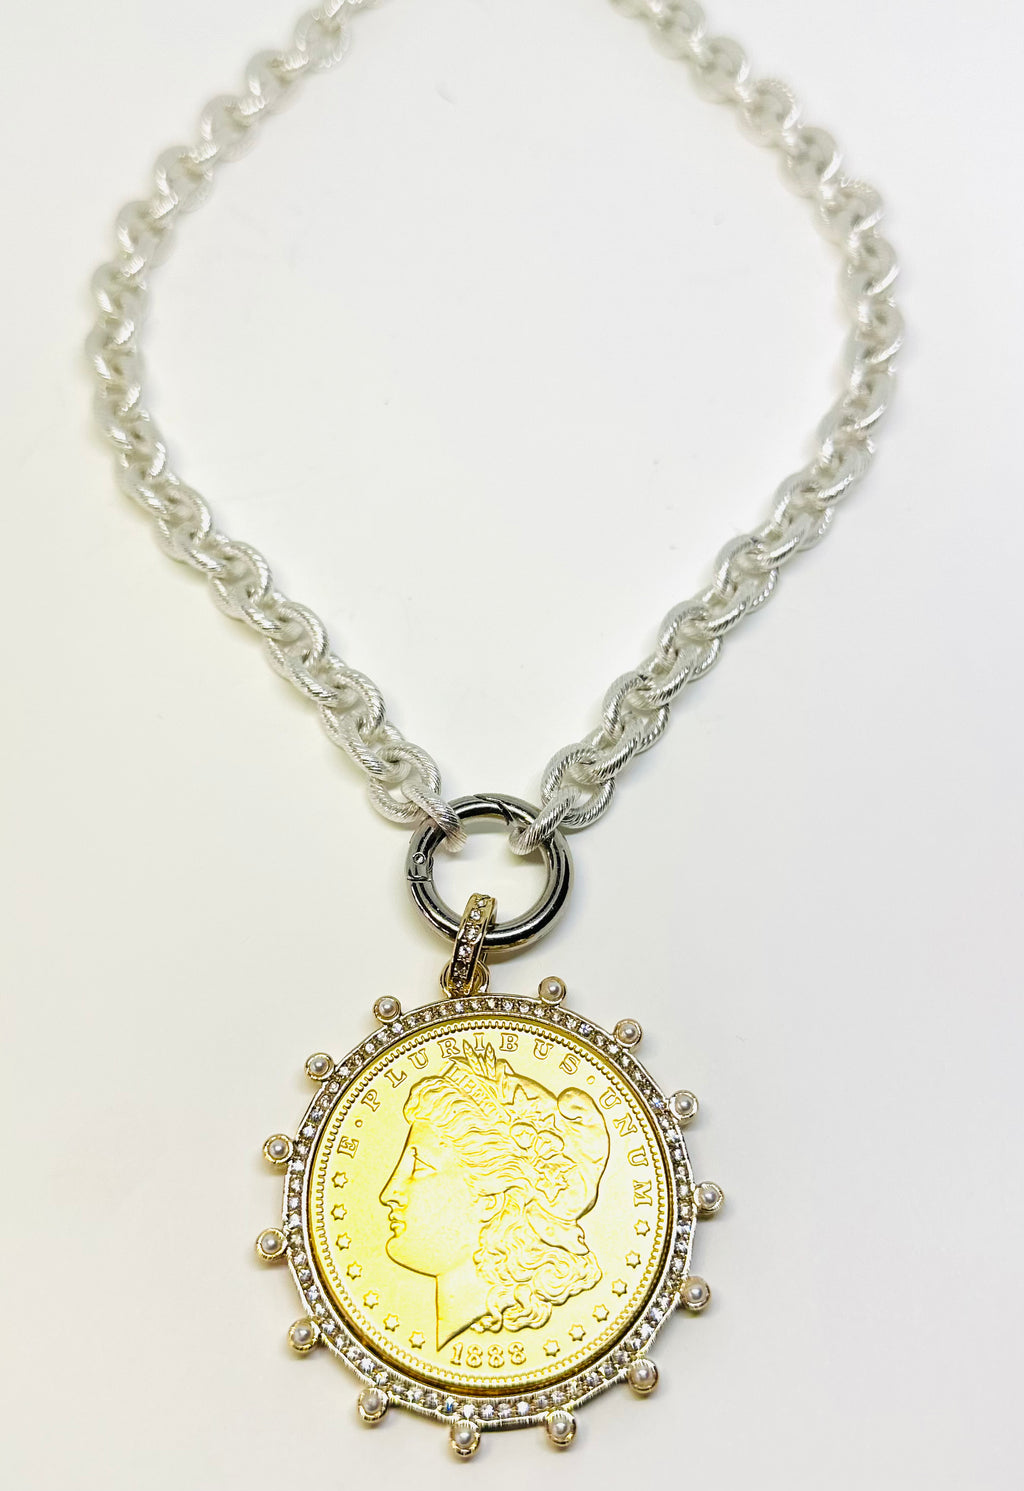 Bezel Set Gold Coin Necklace with Silver Vintage Rope Chain